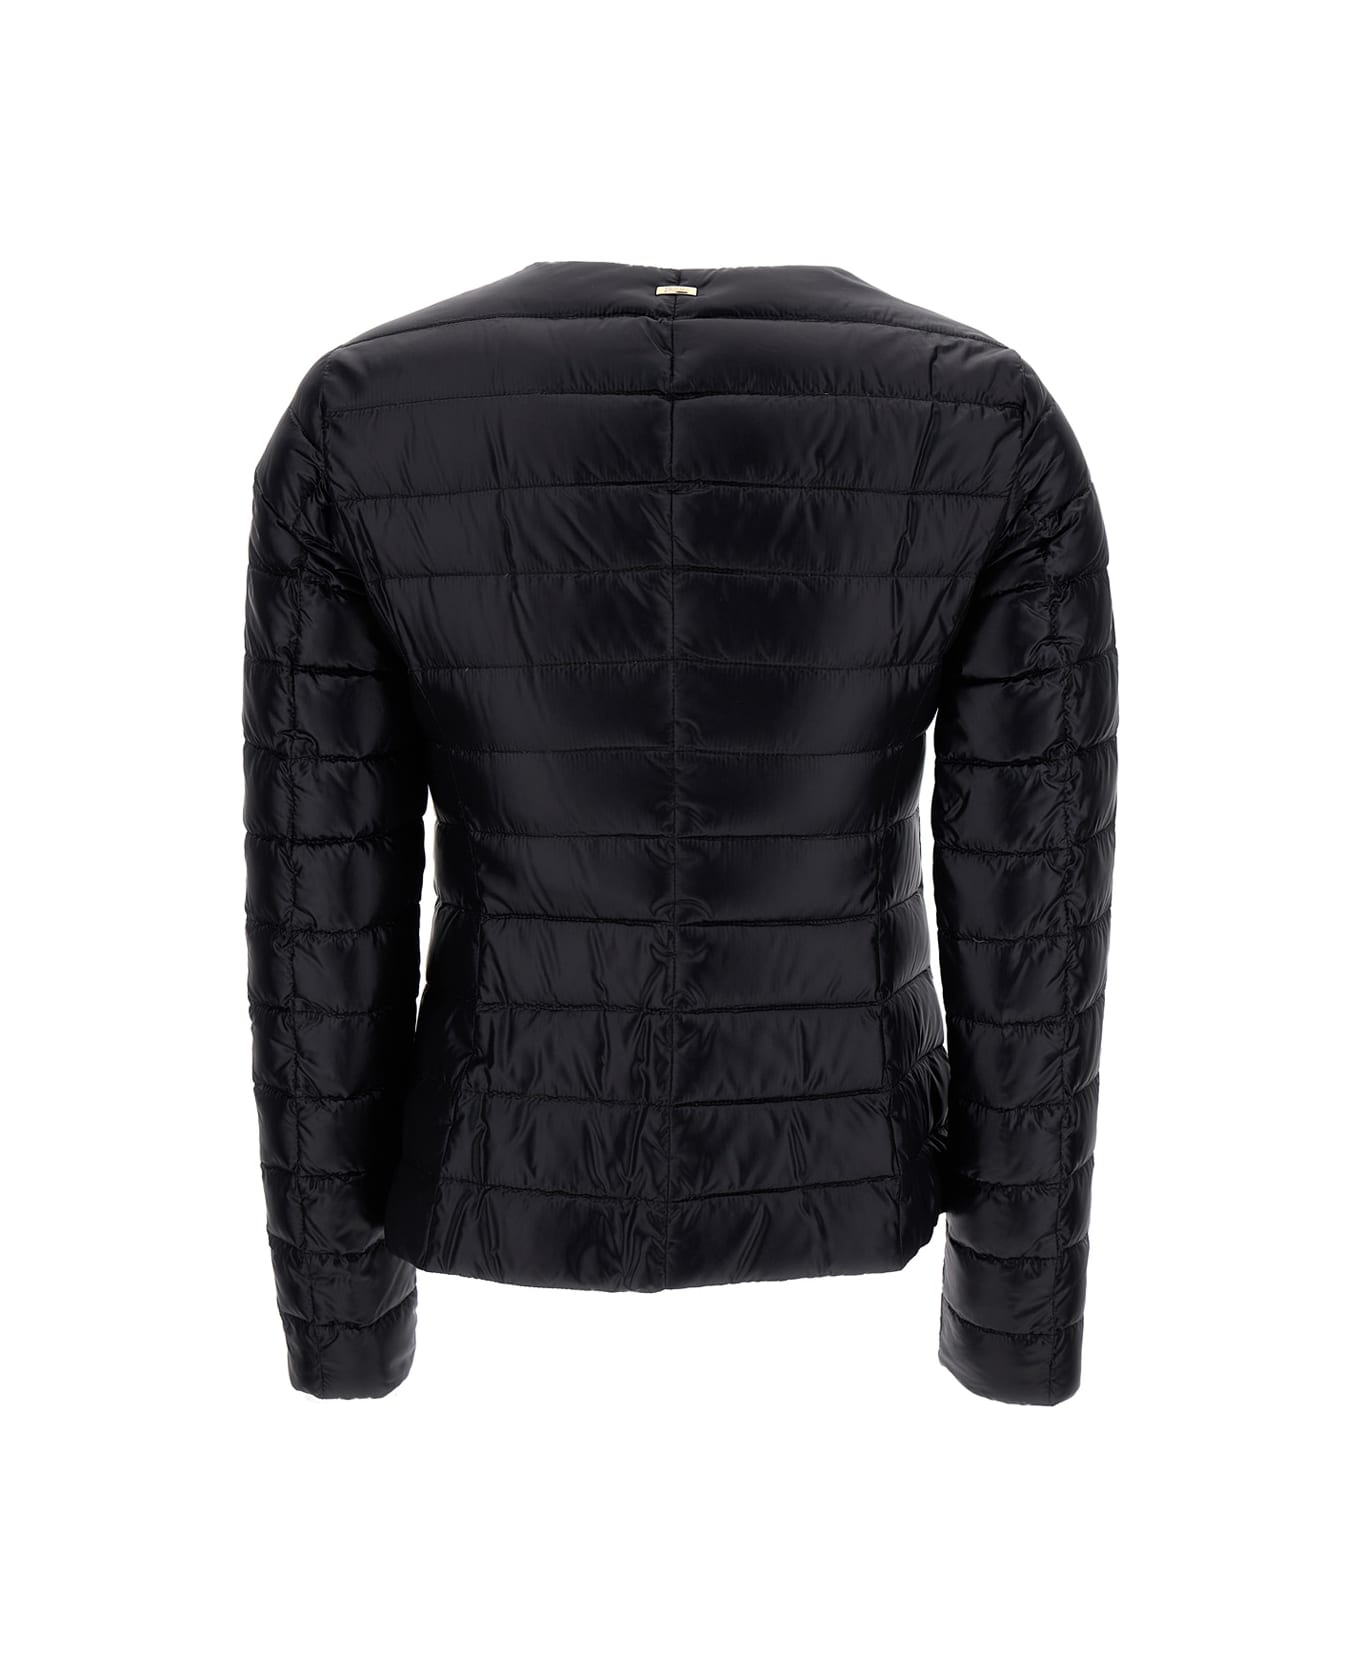 Herno Black Crew-neck Jacket In Technical Fabric Woman - Black